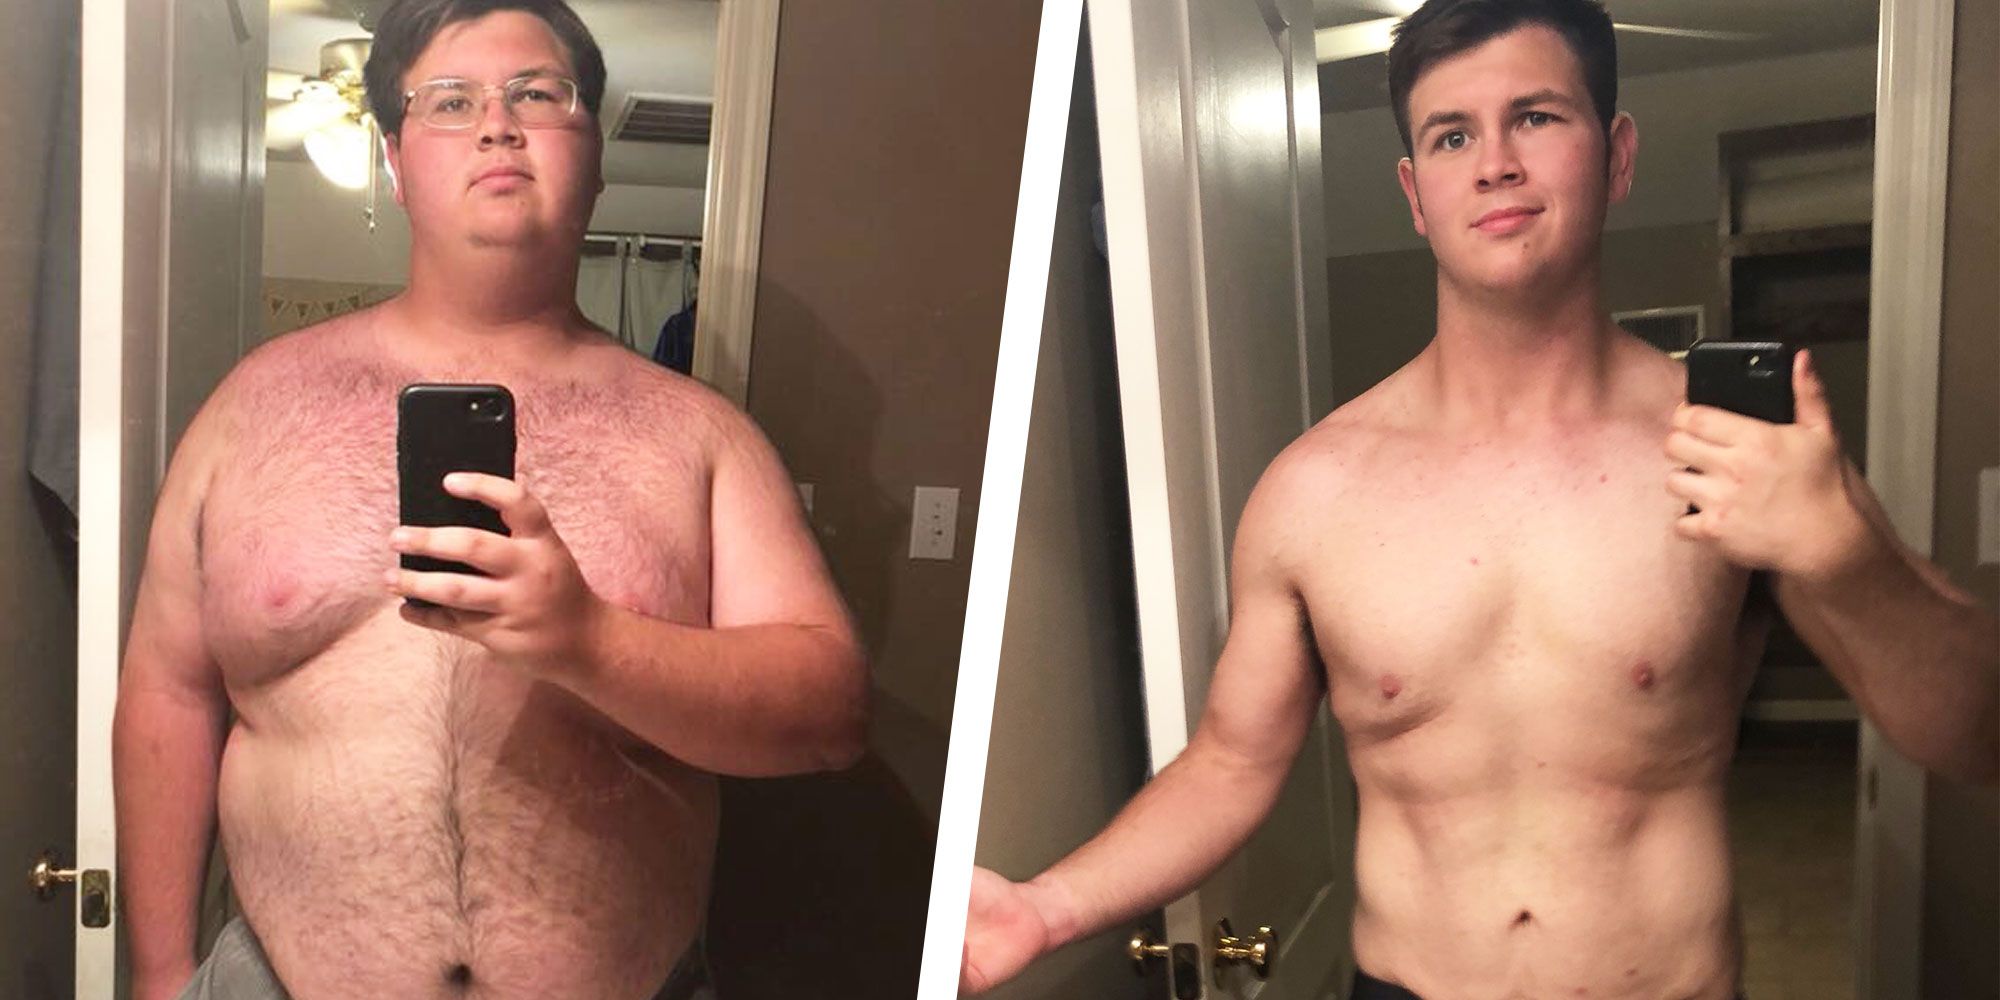 How To Lose 130 Pounds In 3 Months?